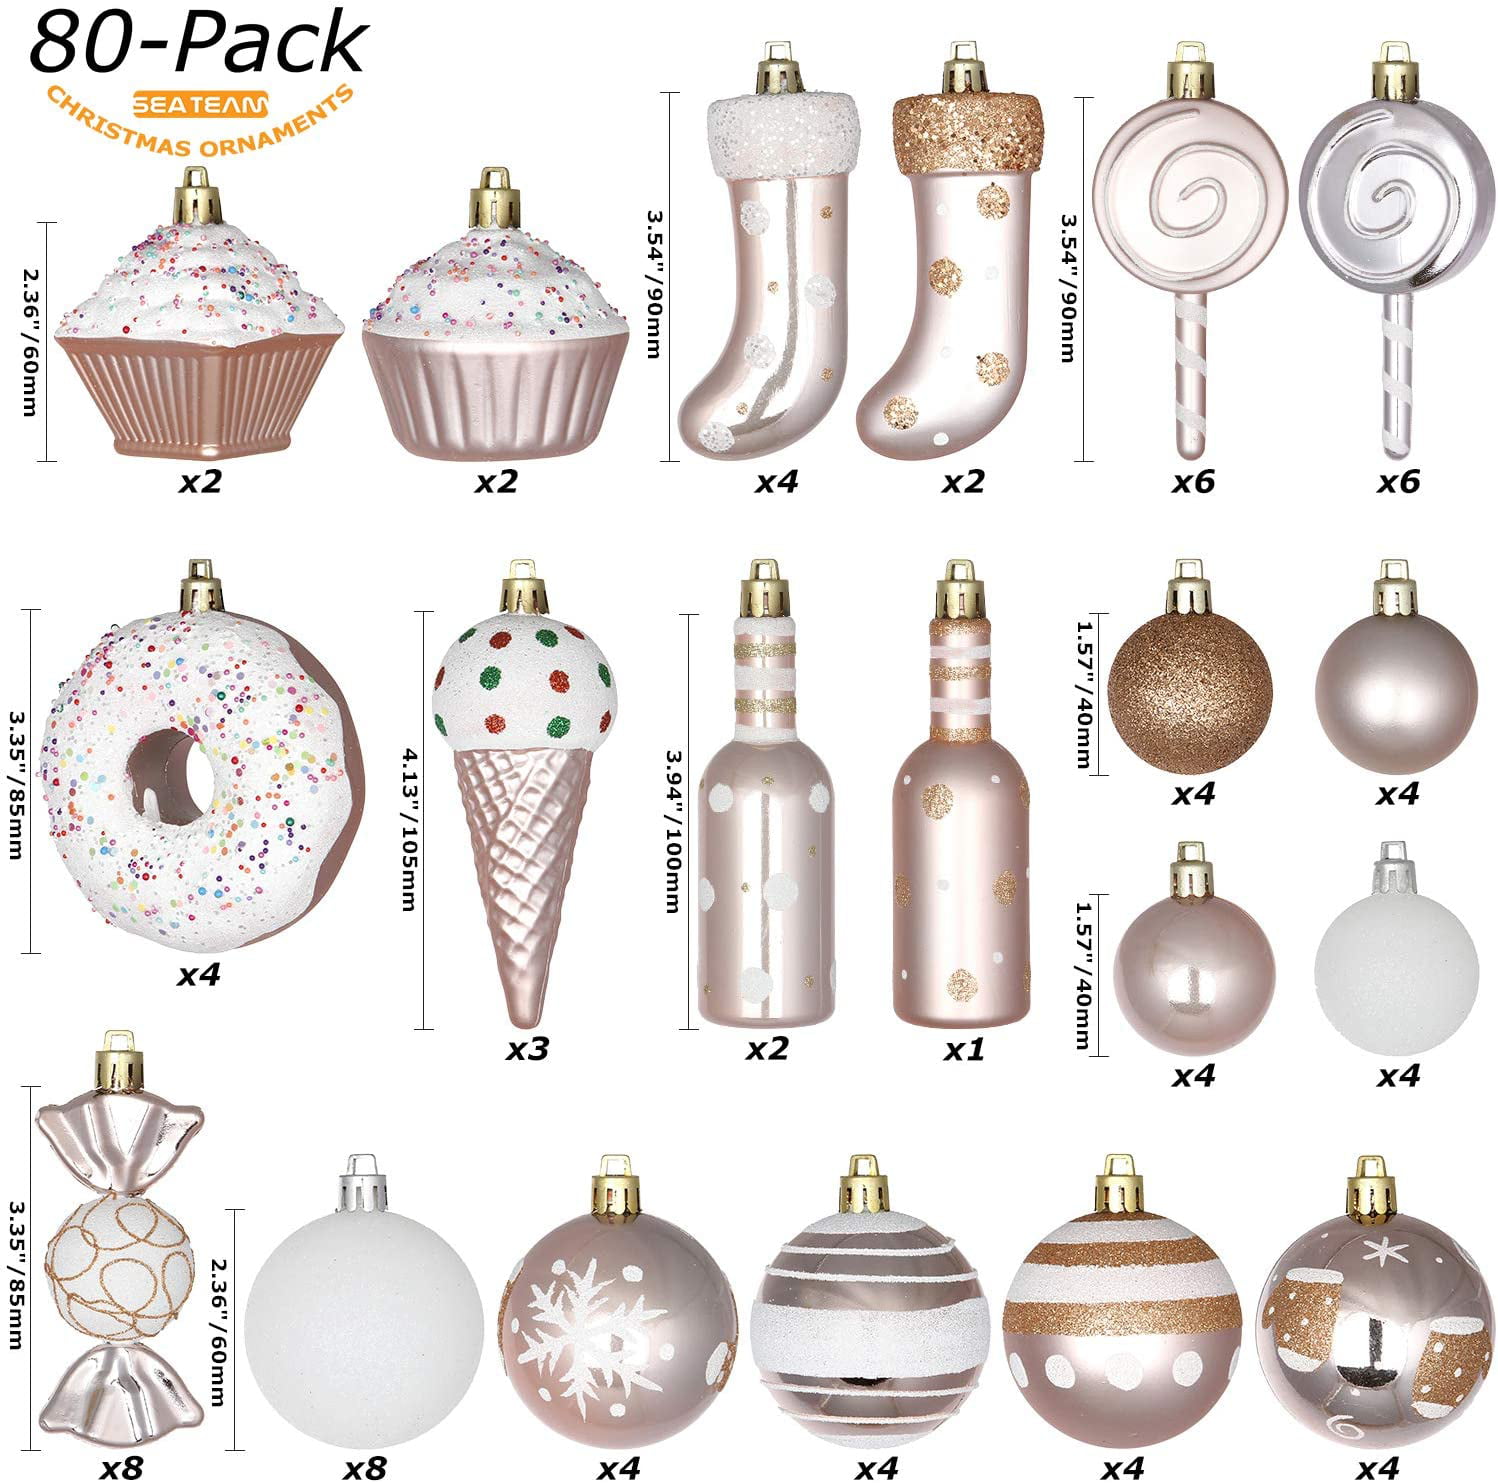 Rose Gold Sea Team 80-Pack Assorted Shatterproof Christmas Ball Ornaments Set Decorative Baubles Pendants with Reusable Hand-held Gift Package for Xmas Tree 